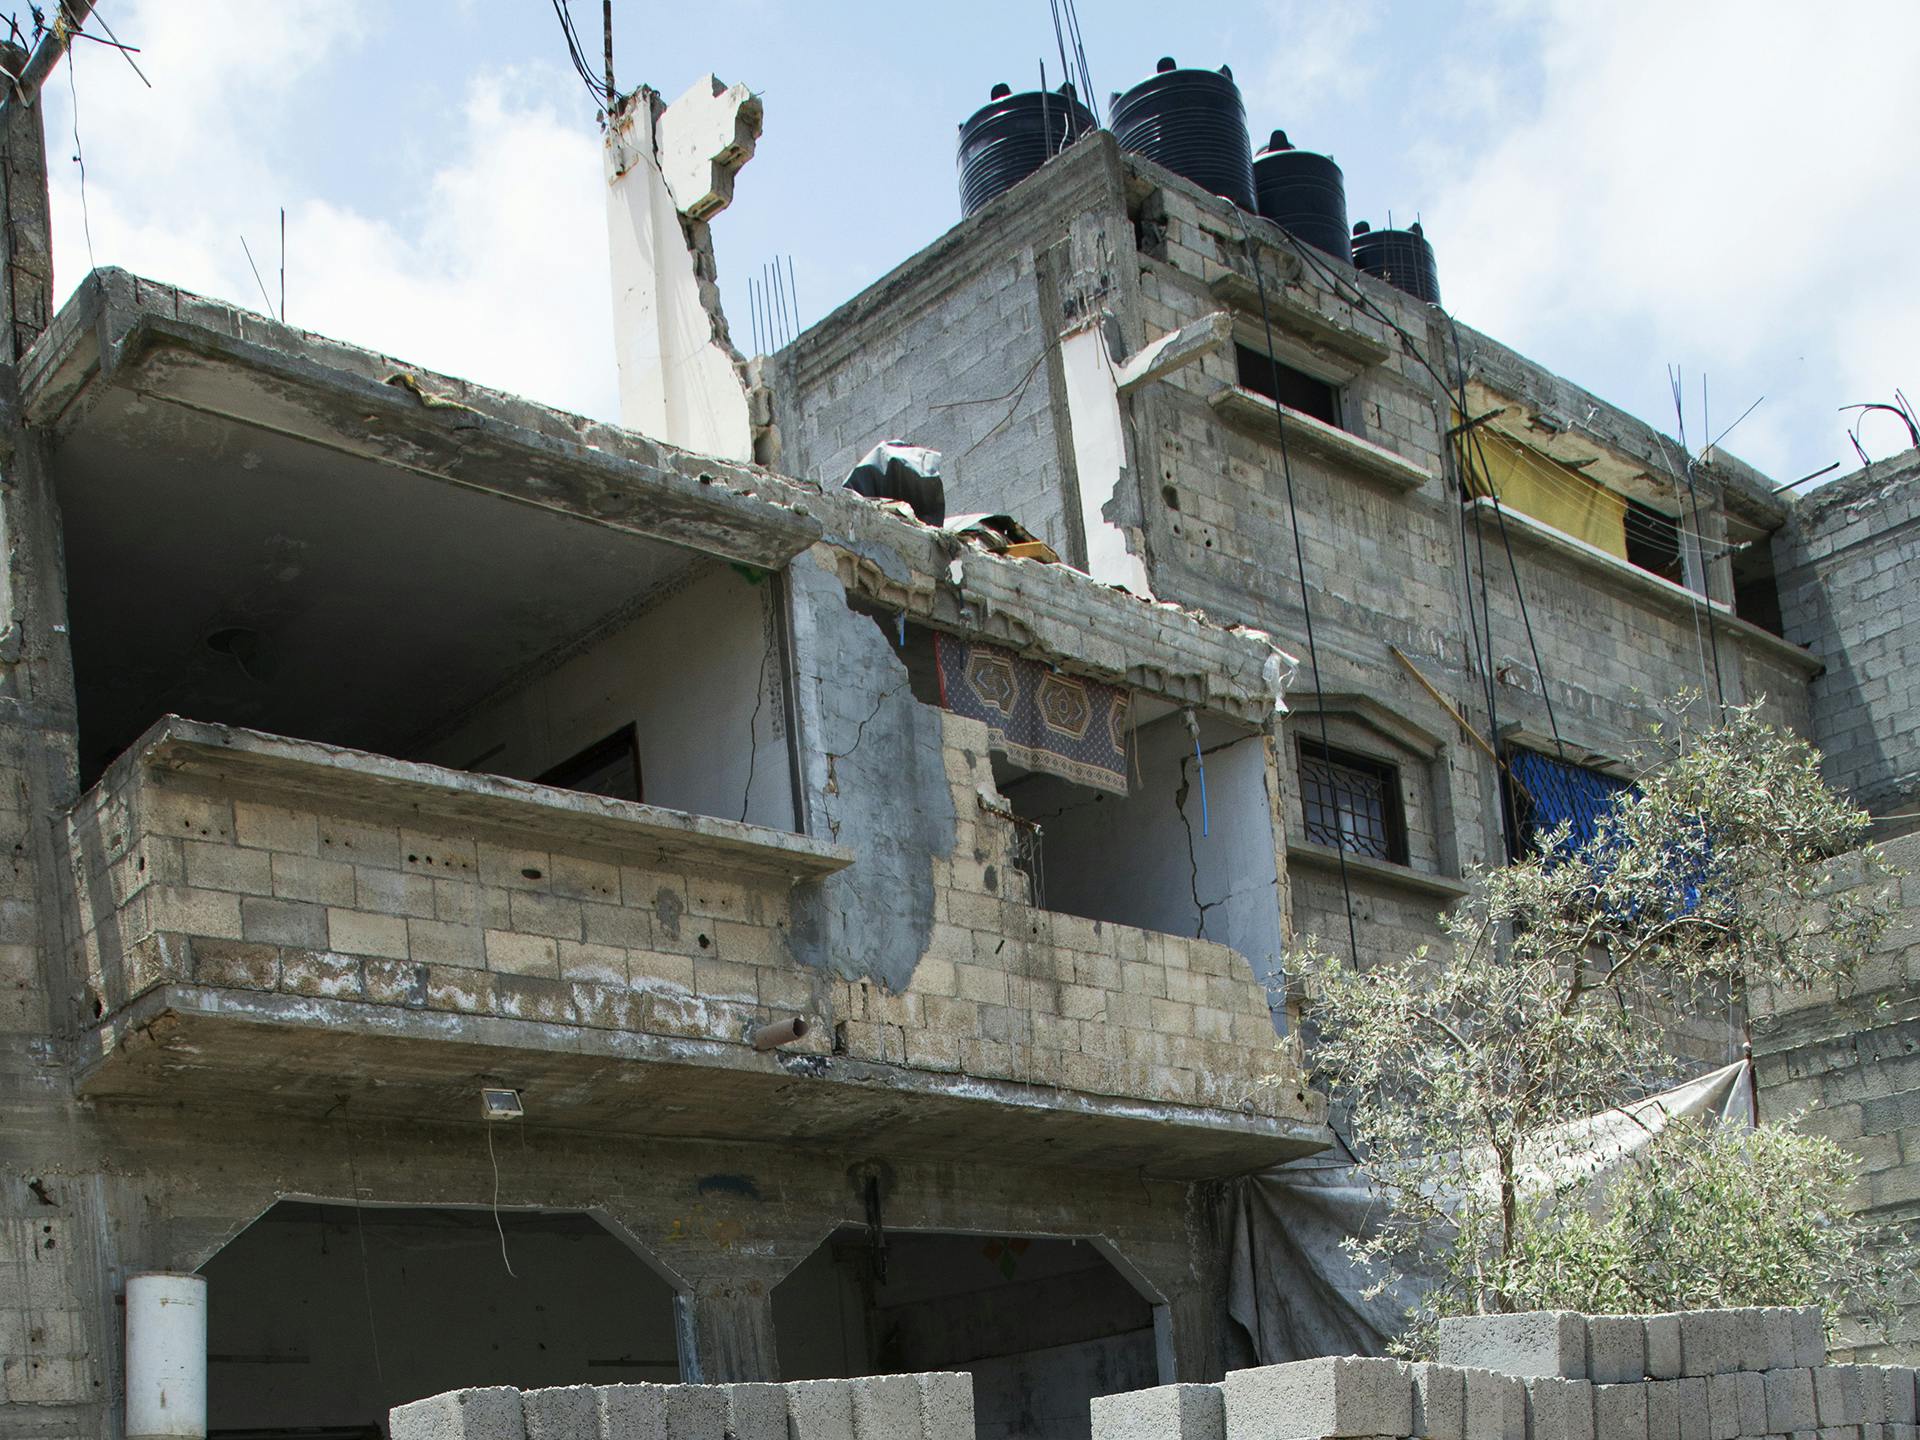 A view of bombed houses in Gaza.